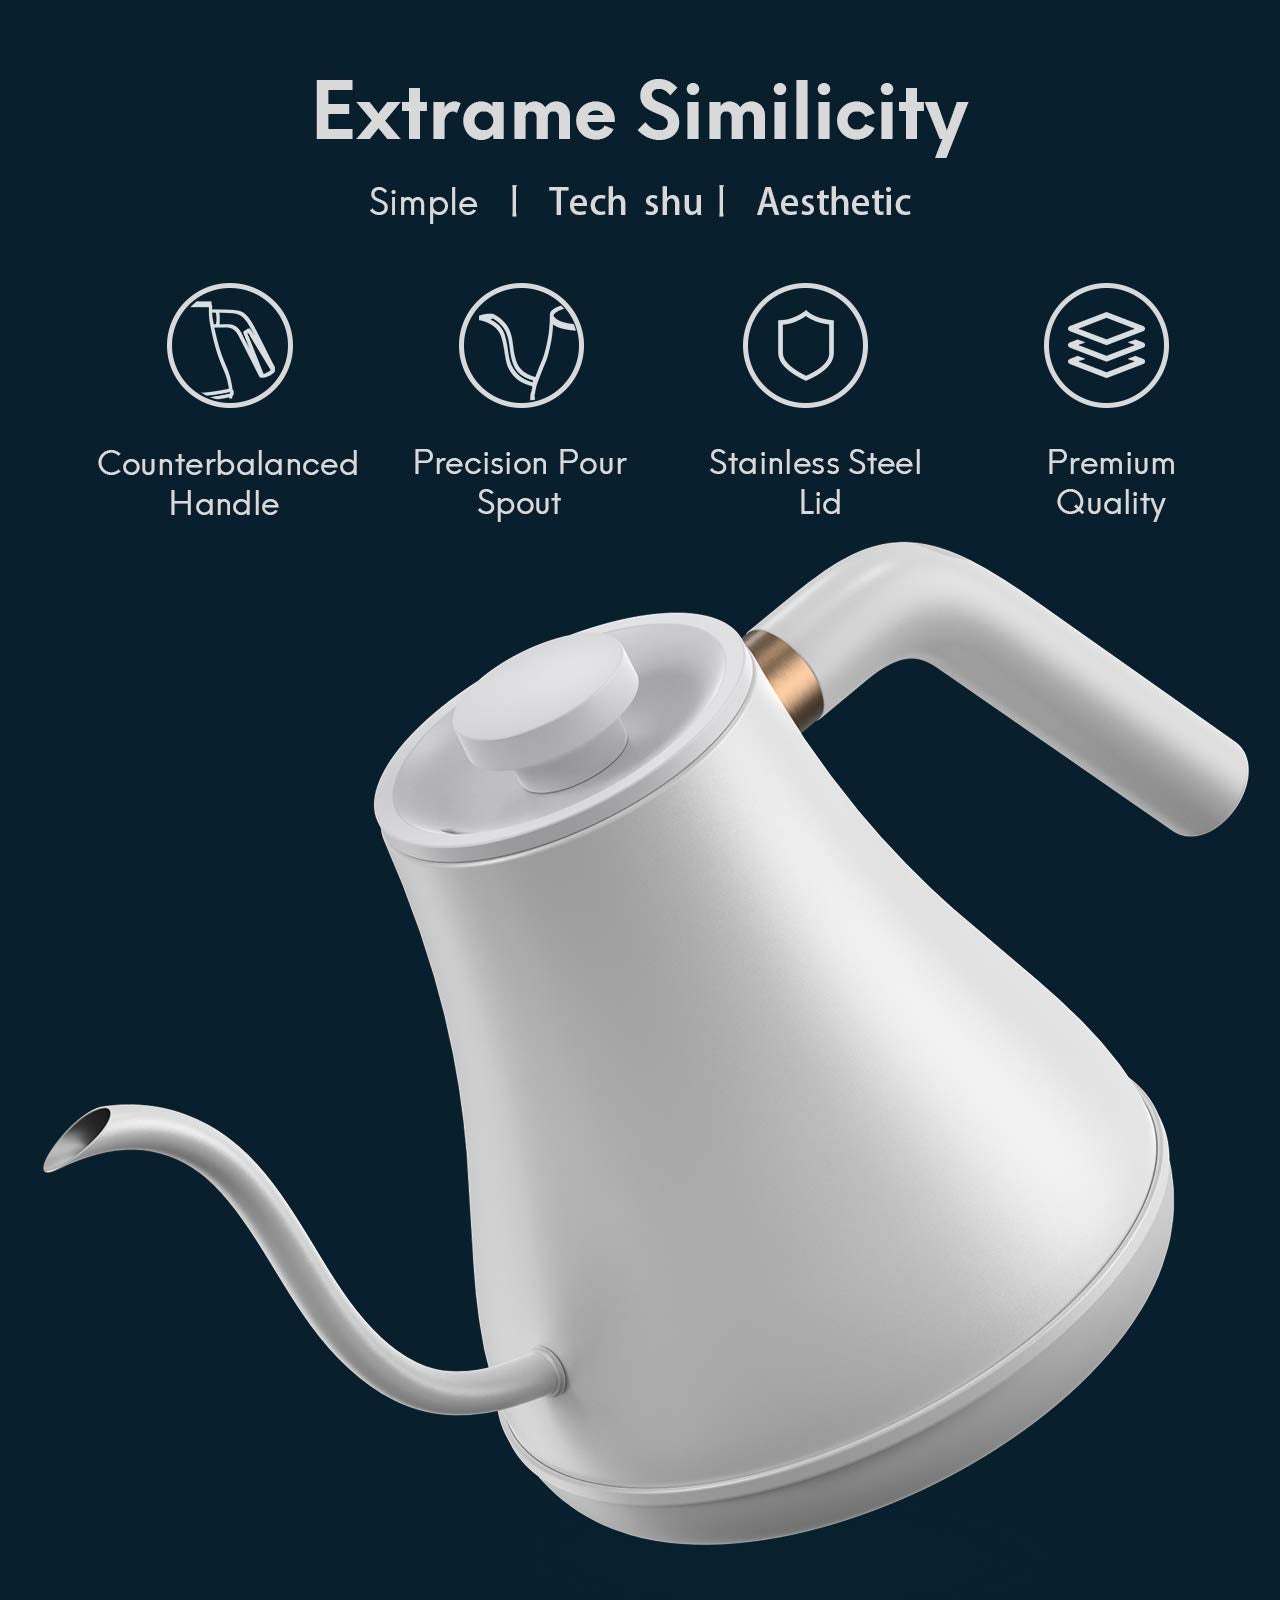 Load image into Gallery viewer, Electric Gooseneck Kettle Temperature Control, Pour Over Kettle for Coffee and Tea, 100% Stainless Steel Inner Lid and Bottom
